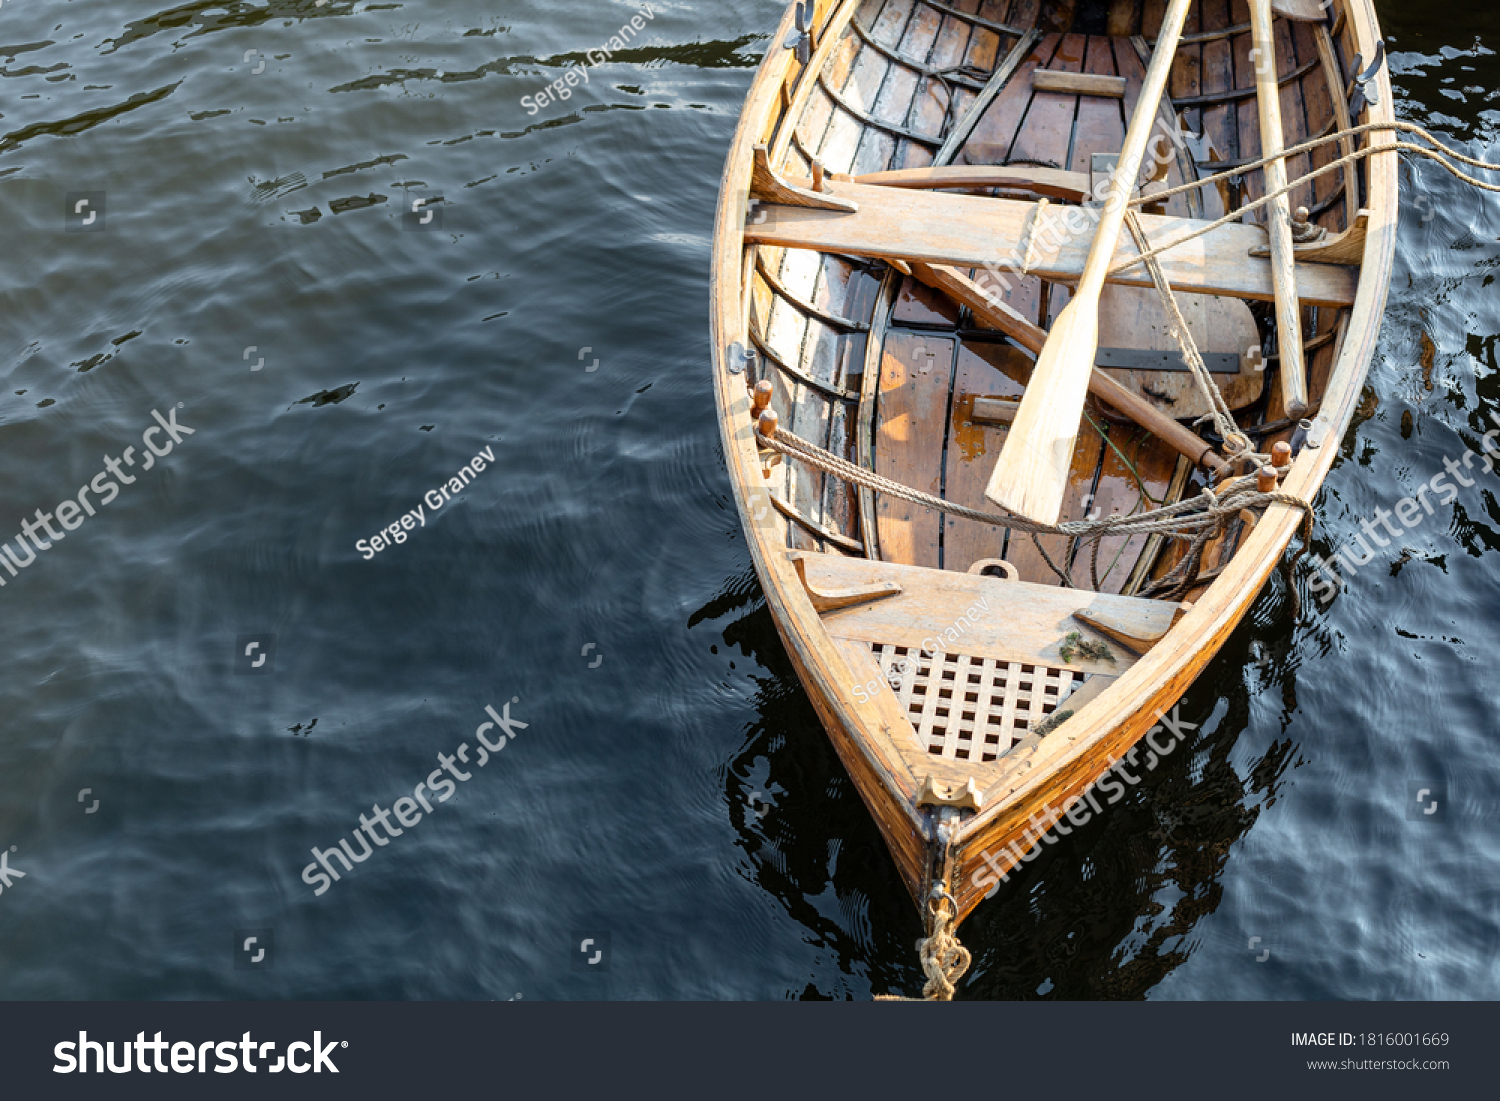 bow of a wooden boat with oars #1816001669